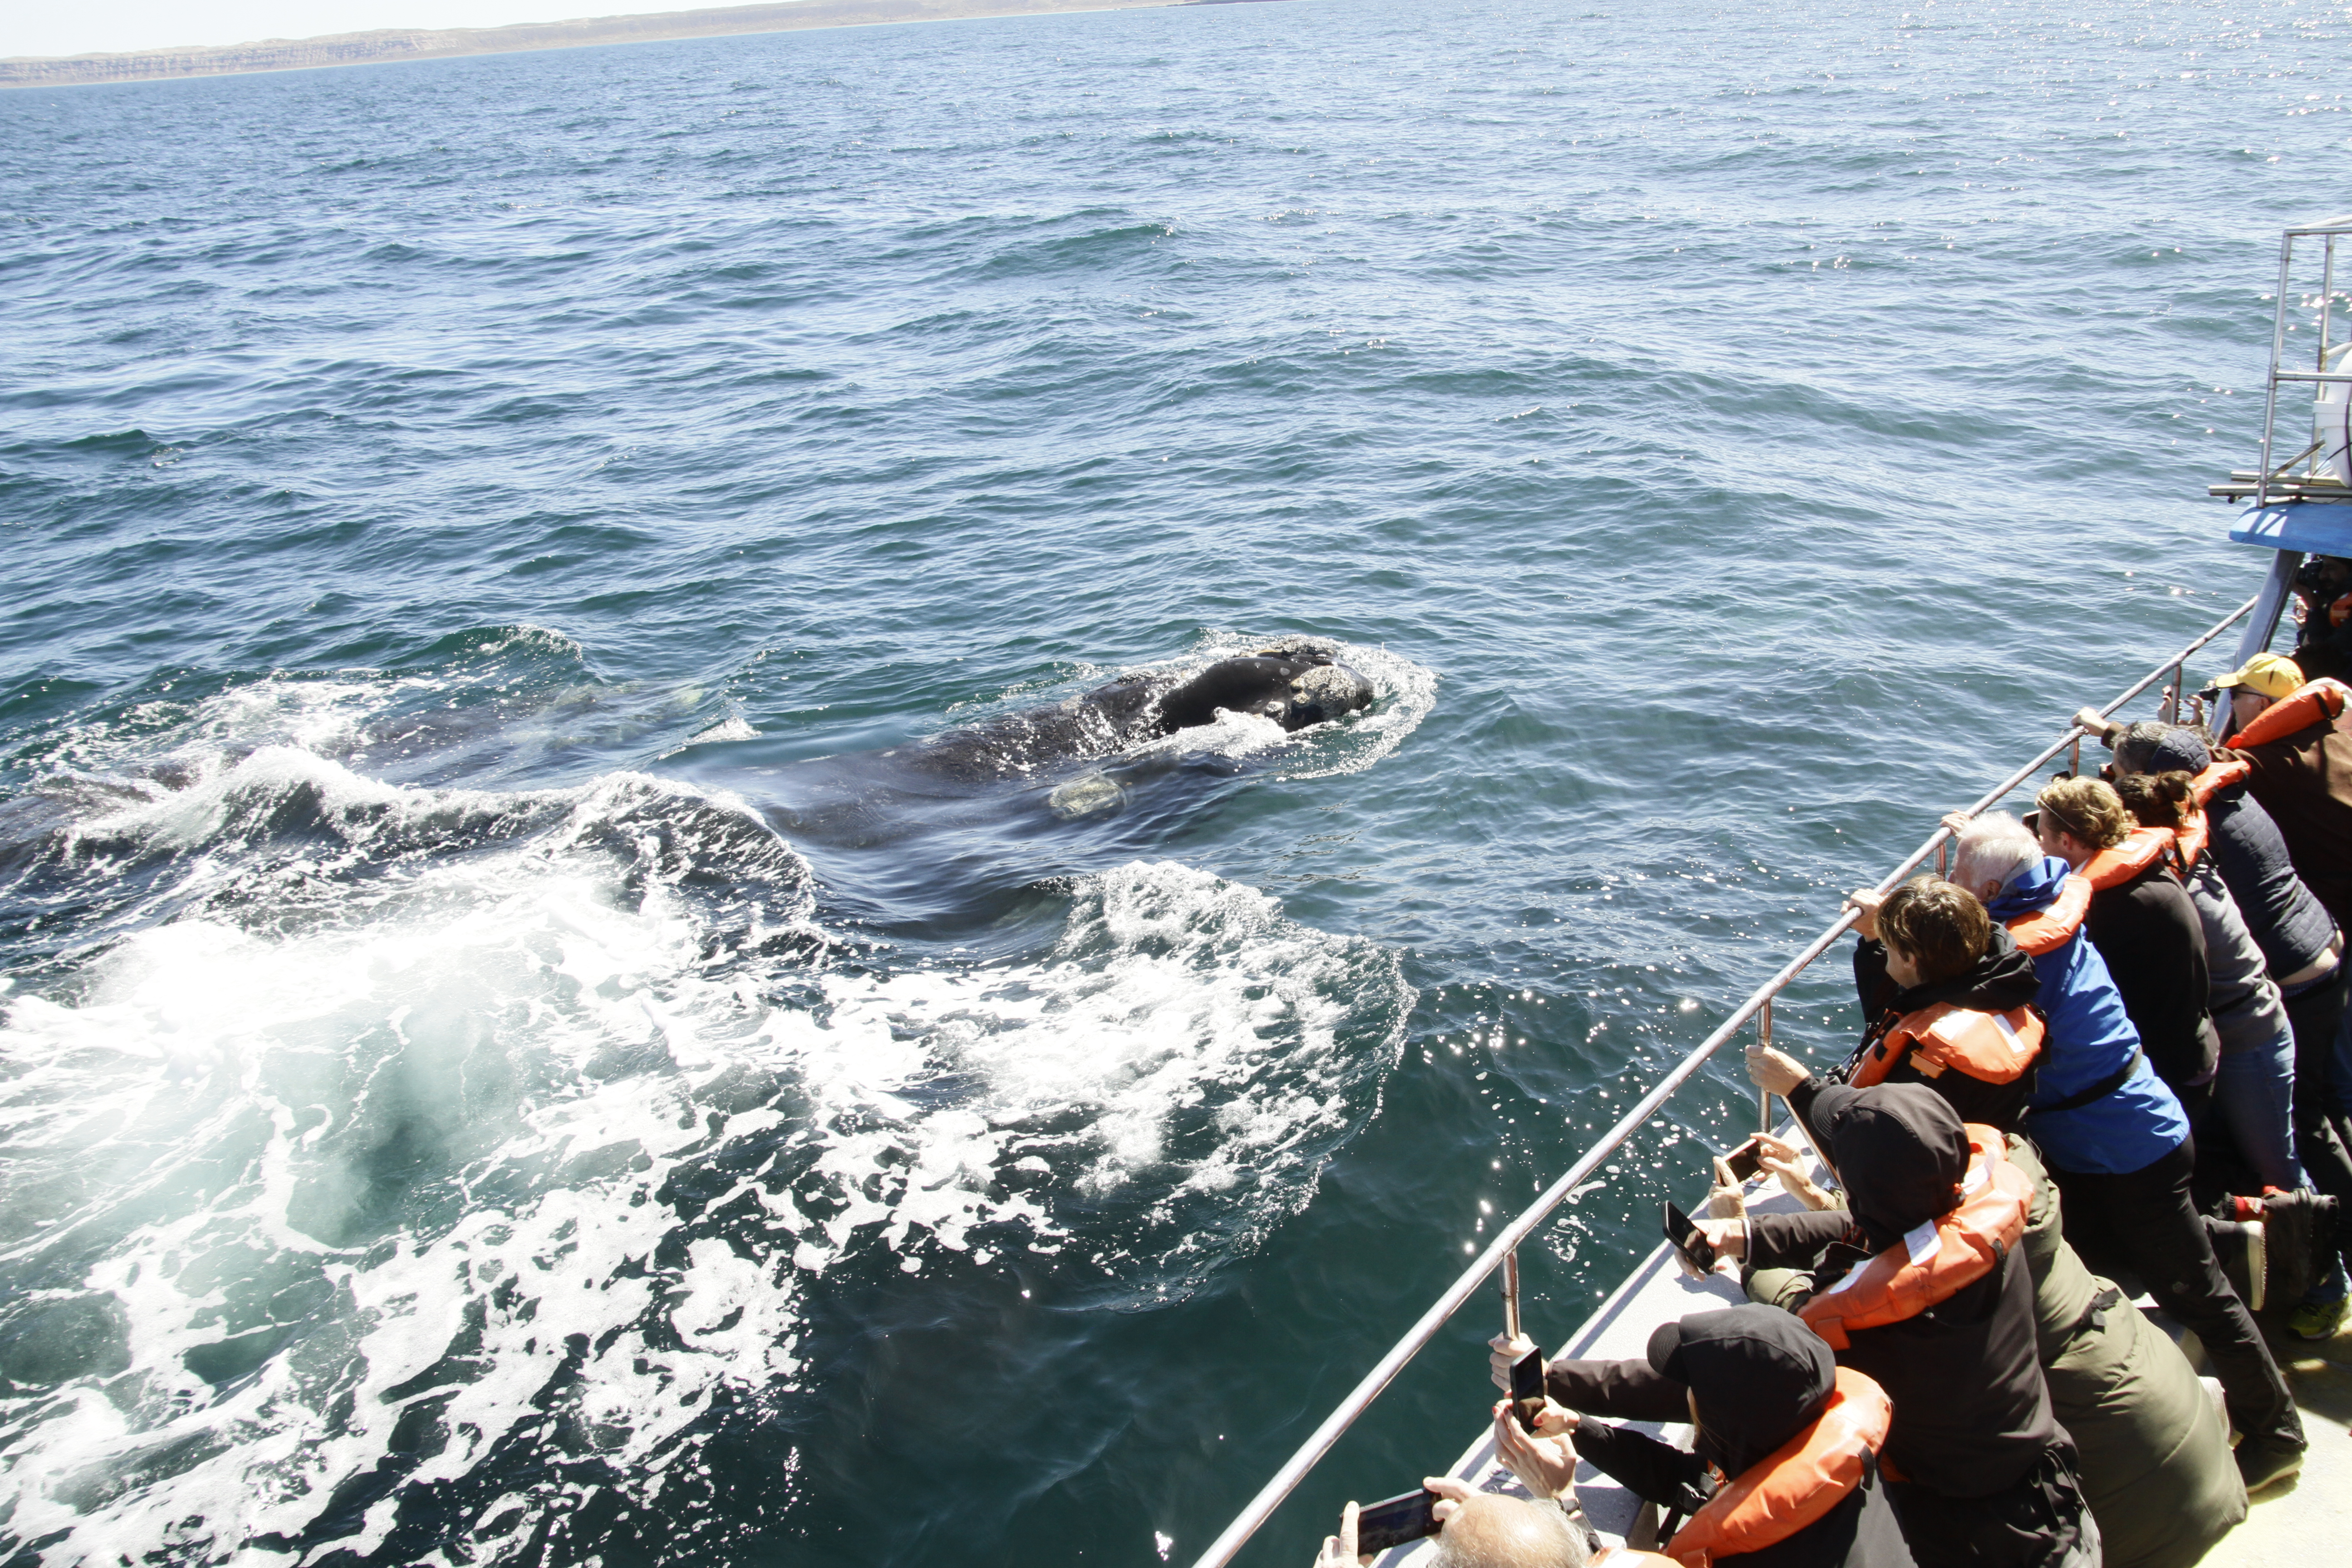 A Southern right whale coming very close to our boat - they are known to be curious and friendly.